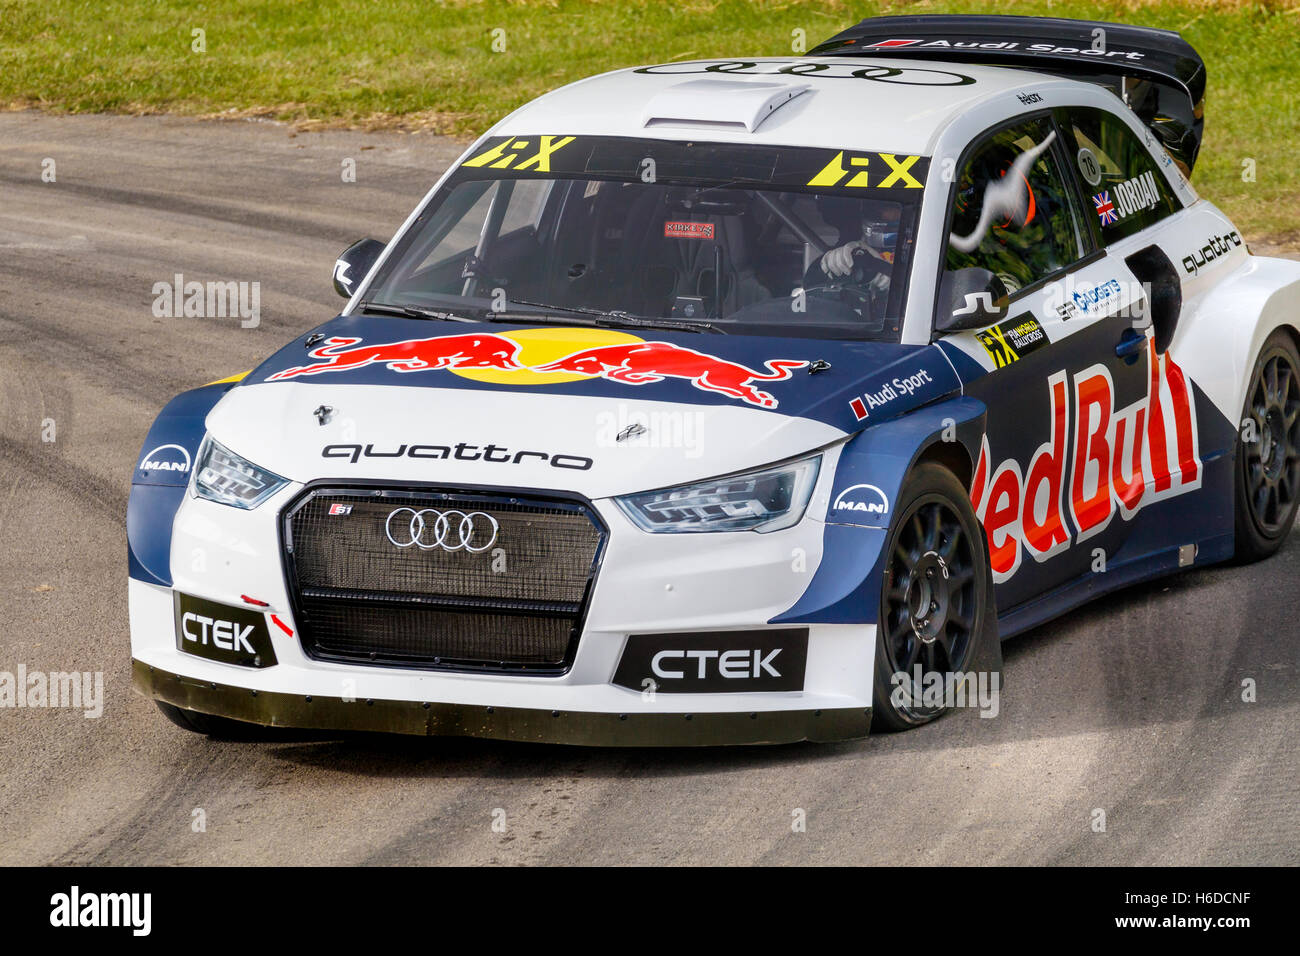 2016 Audi S1 EKS RX rallycross car with driver Andrew Jordan at the 2016 Goodwood Festival of Speed, Sussex, UK Stock Photo